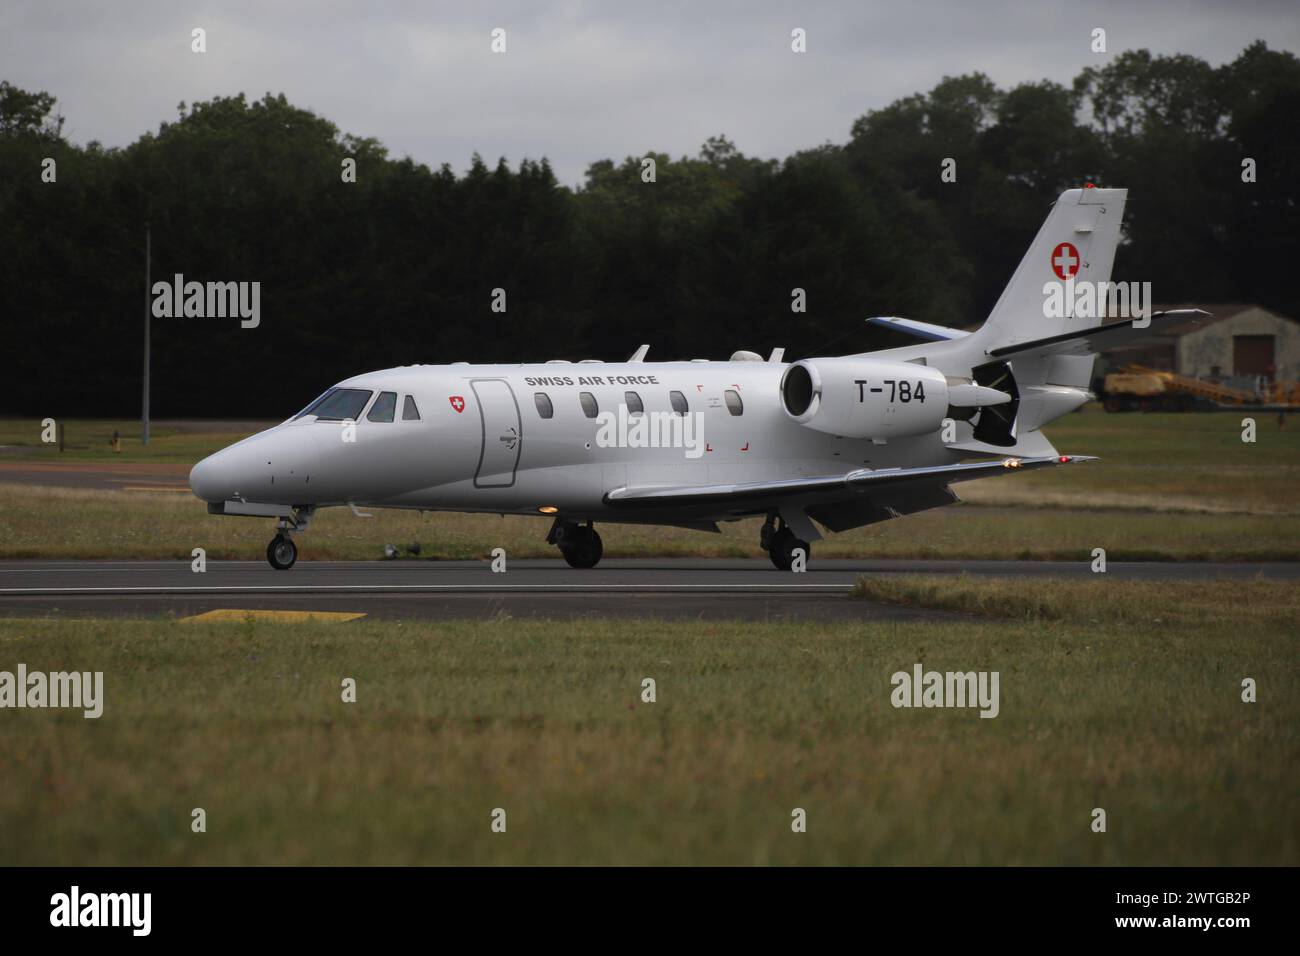 T-784, a Cessna 560XL Citation Excel operated by the Swiss Air Force in a VIP transportation role, arriving at RAF Fairford in Gloucestershire, England during the Royal International Air Tattoo 2023 (RIAT23). Stock Photo